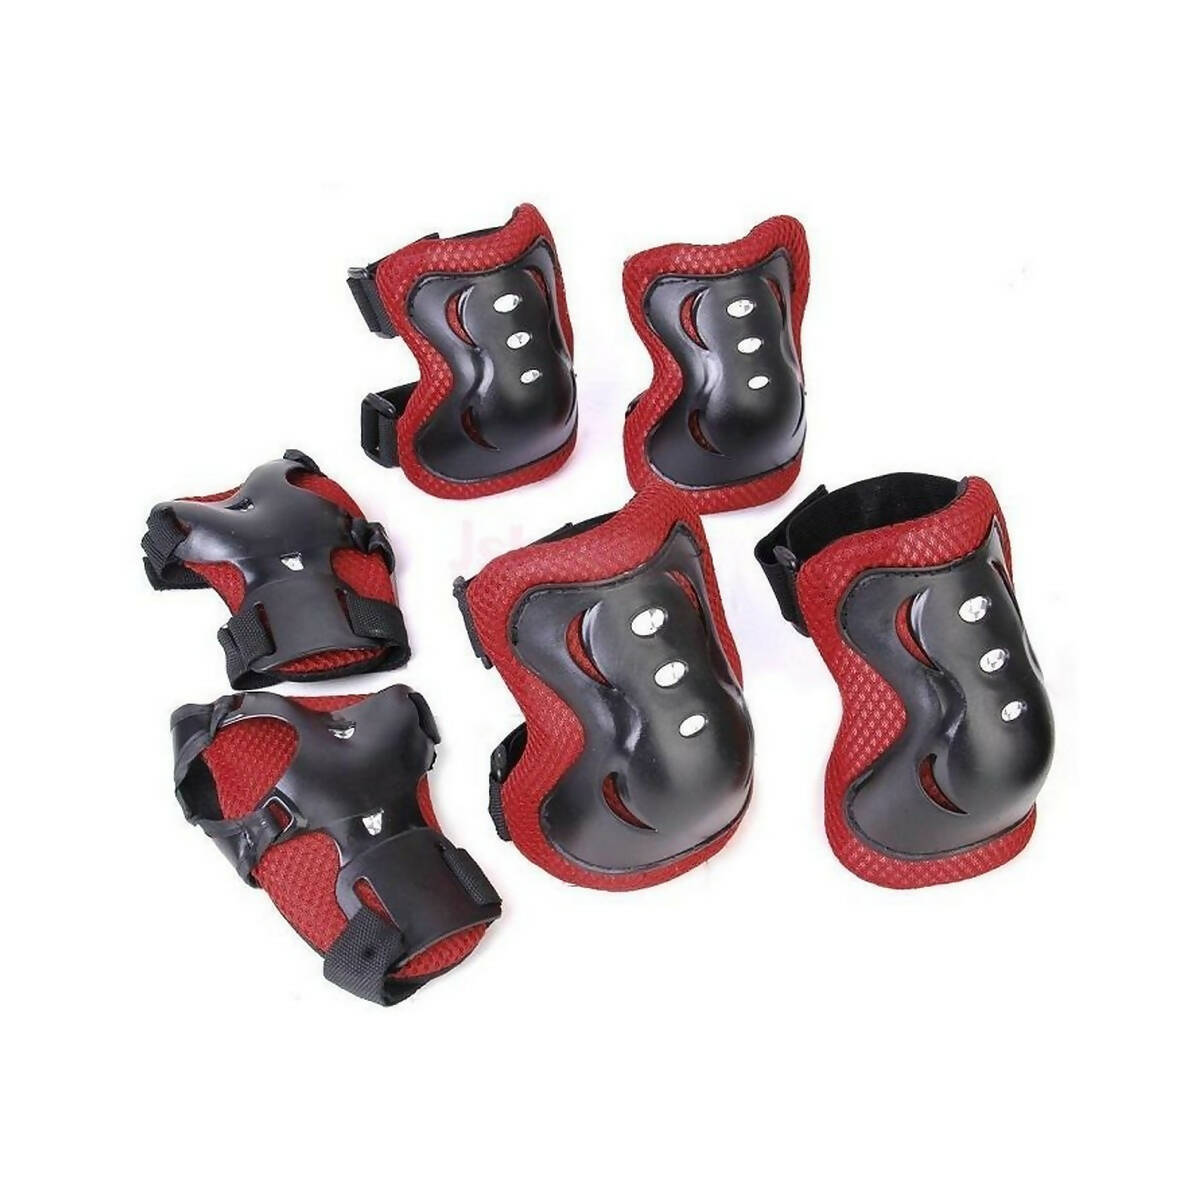 NEW Kid Cycling Roller Skating Knee/Elbow/Wrist Guard - Red